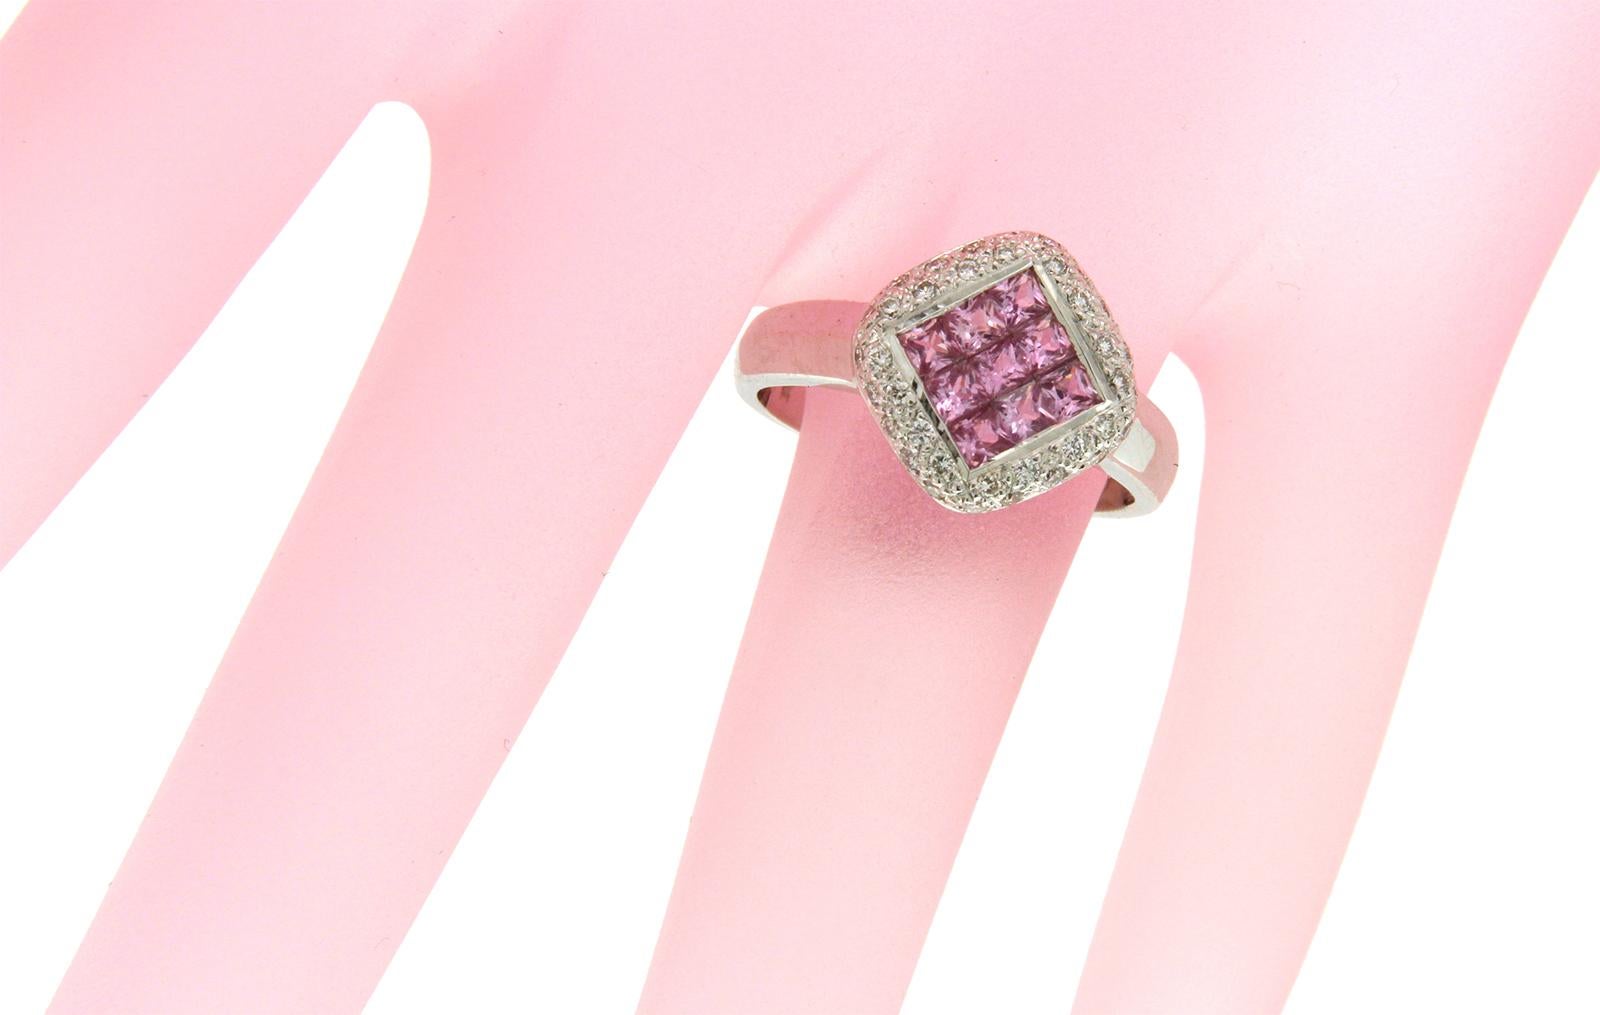 Type: Ring
Top:12.5 mm
Band Width: 3 mm
Metal: White Gold
Metal Purity: 18K
Size:6 to 9
Hallmarks: 18K
Total Weight: 5.1 Grams
Stone Type: 1.27 Natural Pink Sapphire and 0.24 Ct VS2 G Diamonds
Condition: New
Stock Number: BL11
..

Please Message Us